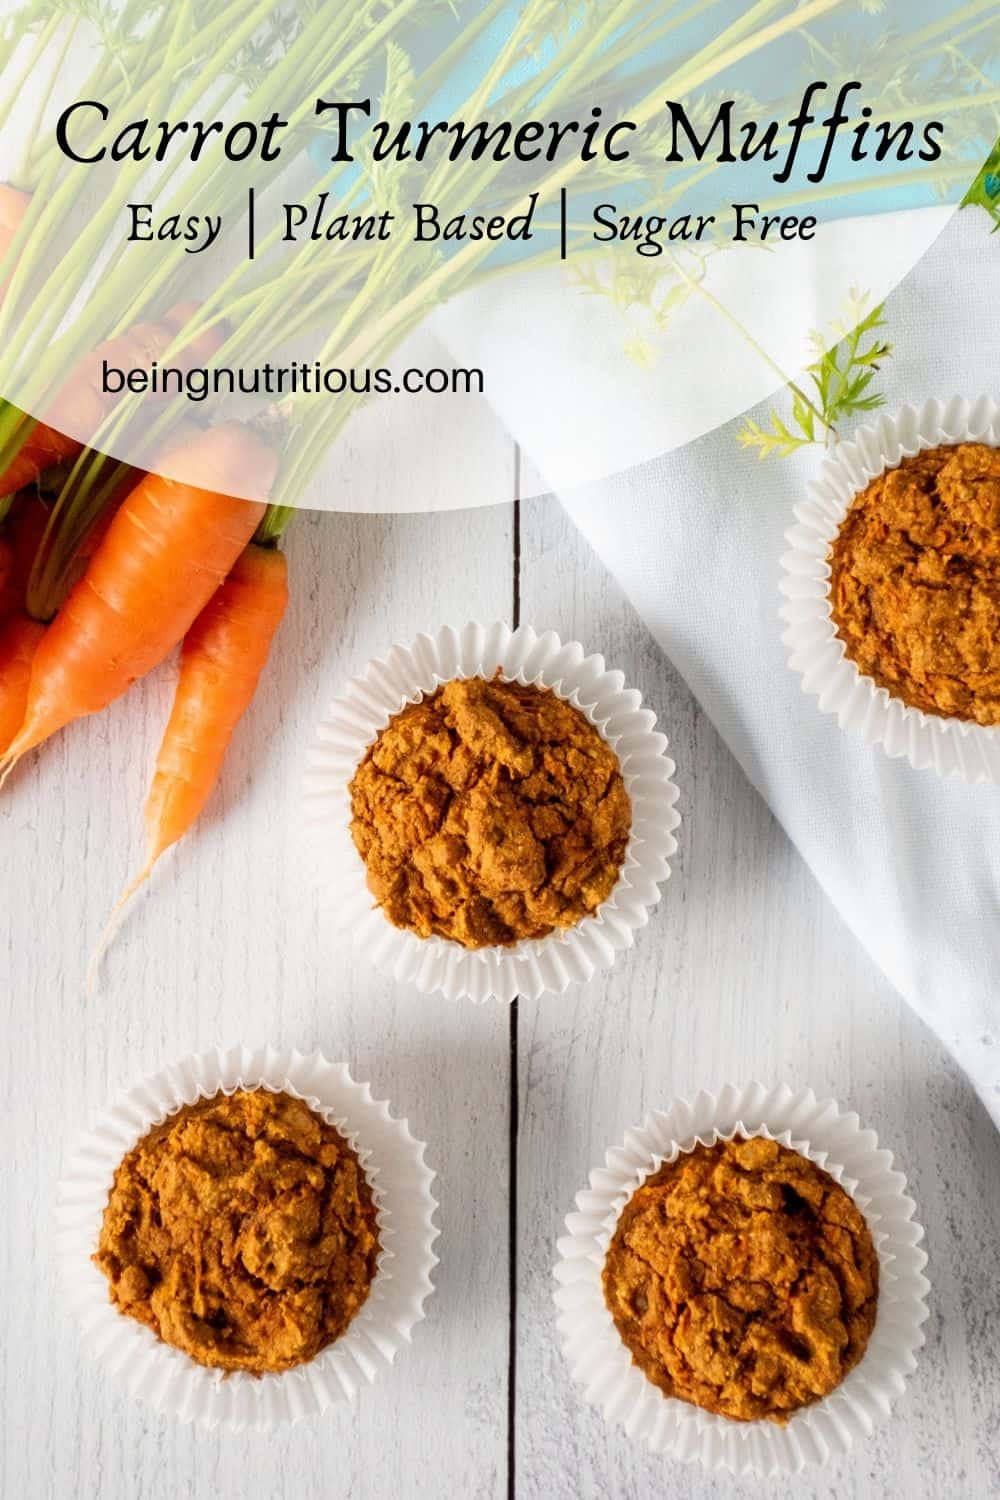 Muffins on a table with fresh carrots. Text overlay: Carrot Turmeric Muffins; easy, whole grain, sugar free.